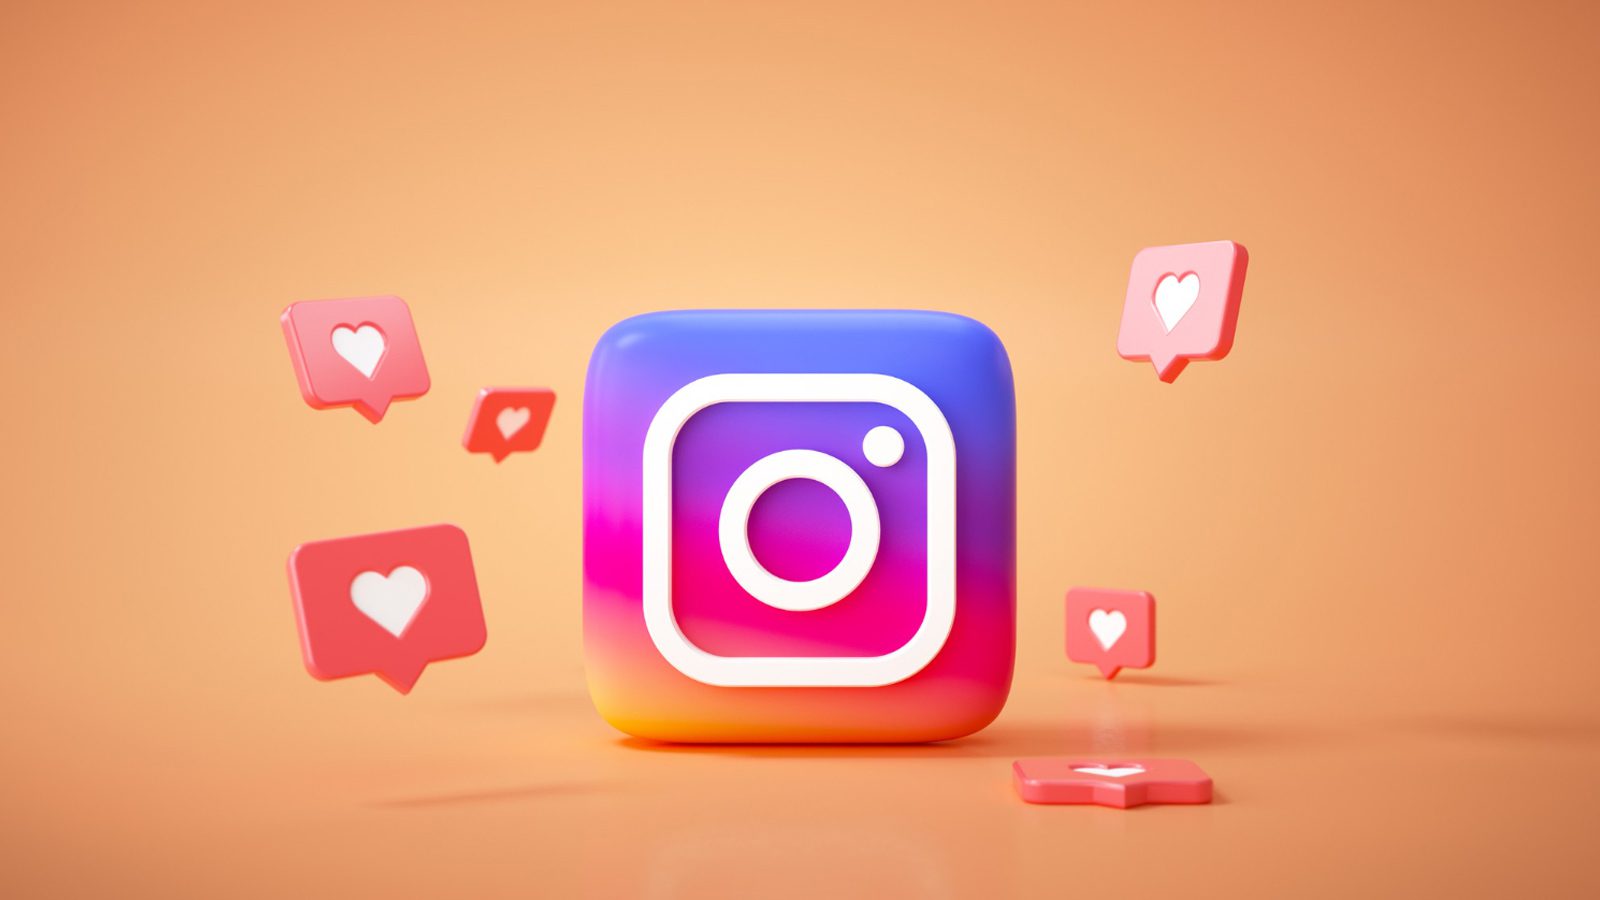 Instagram rolled out Playback to show favorite Stories from 2021